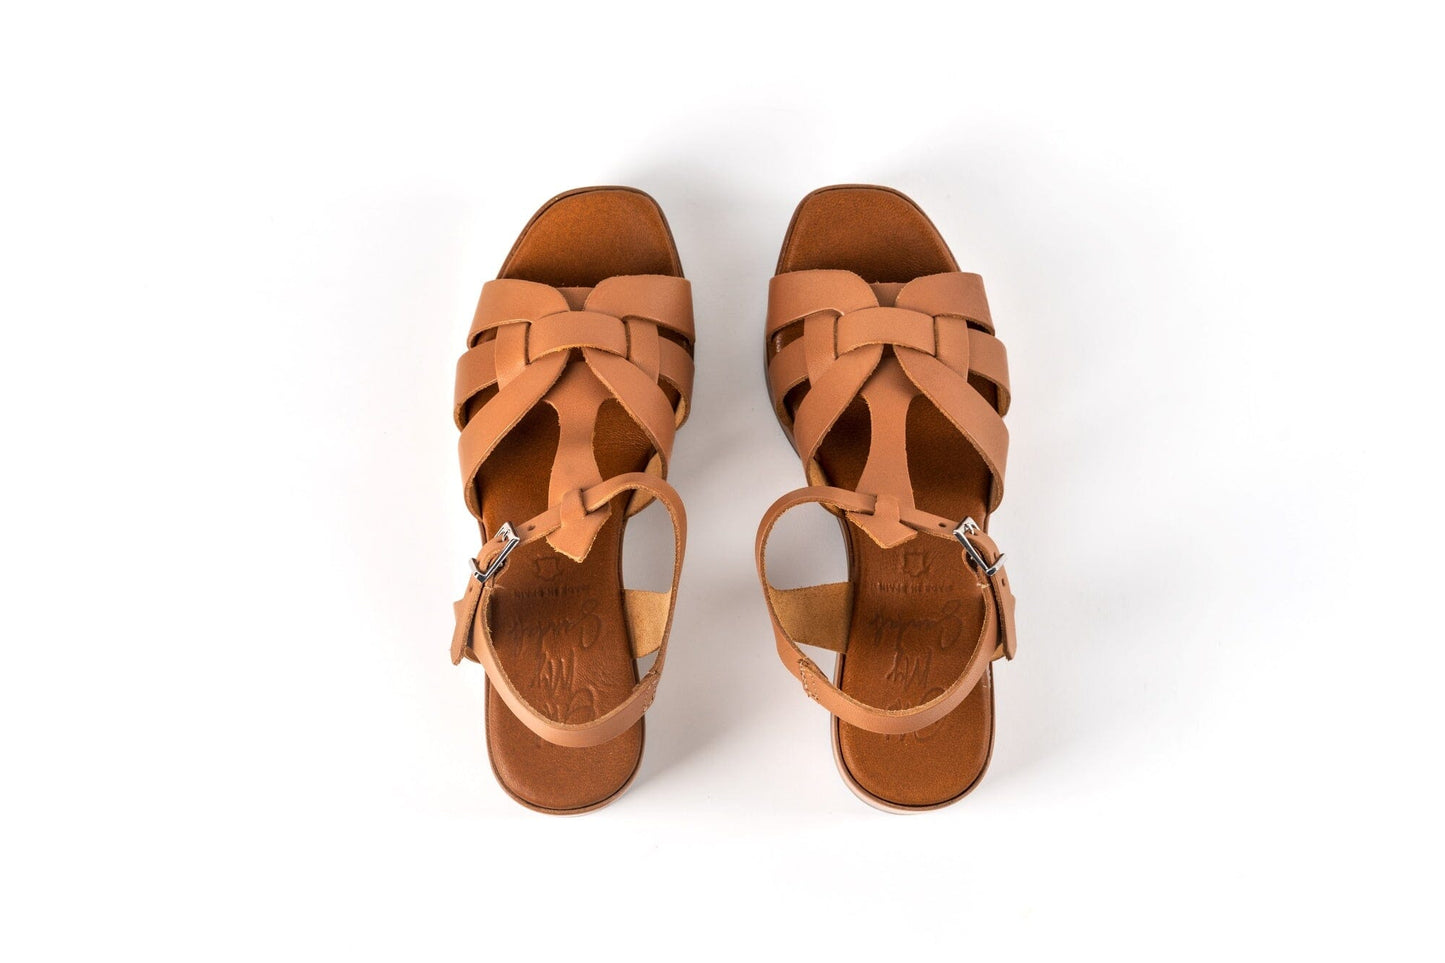 5241 Spanish leather crossed strappy sandals in block heel in Tan sandals Sam Star Shoes 